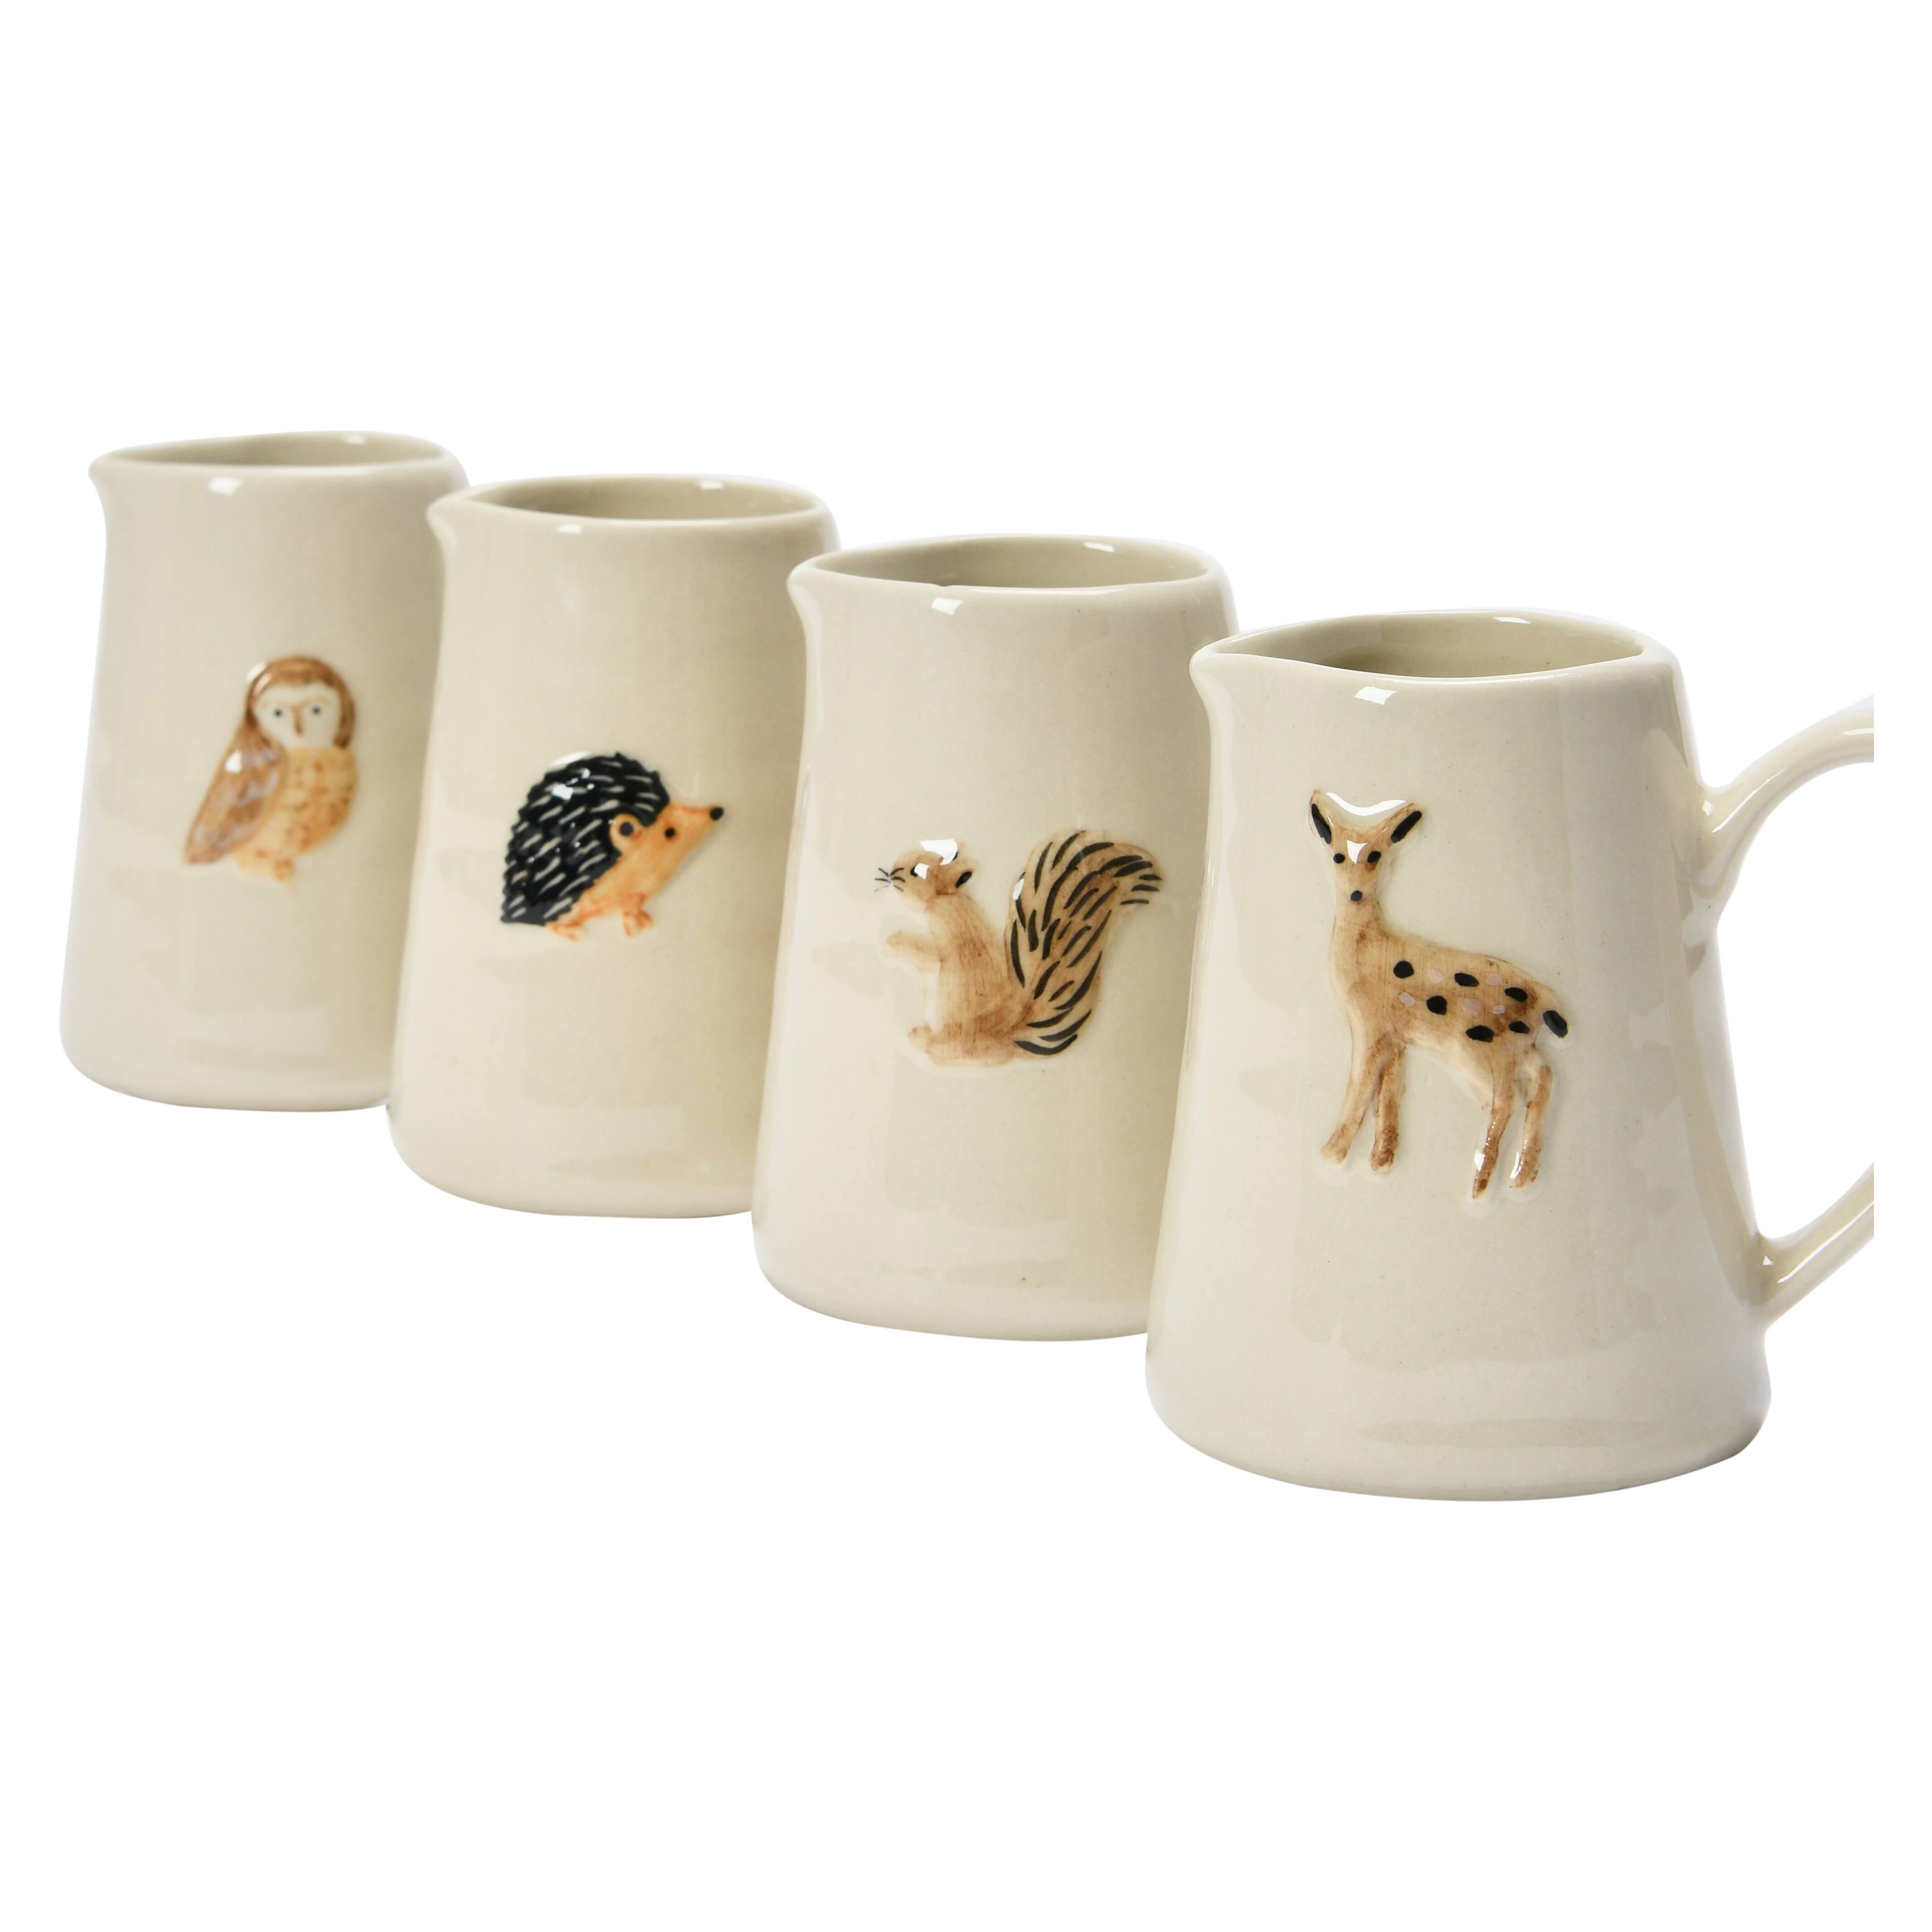 3&#x22; Hand-Painted &#x26; Embossed Forest Animal Ceramic Pitcher Mugs, 4ct. 